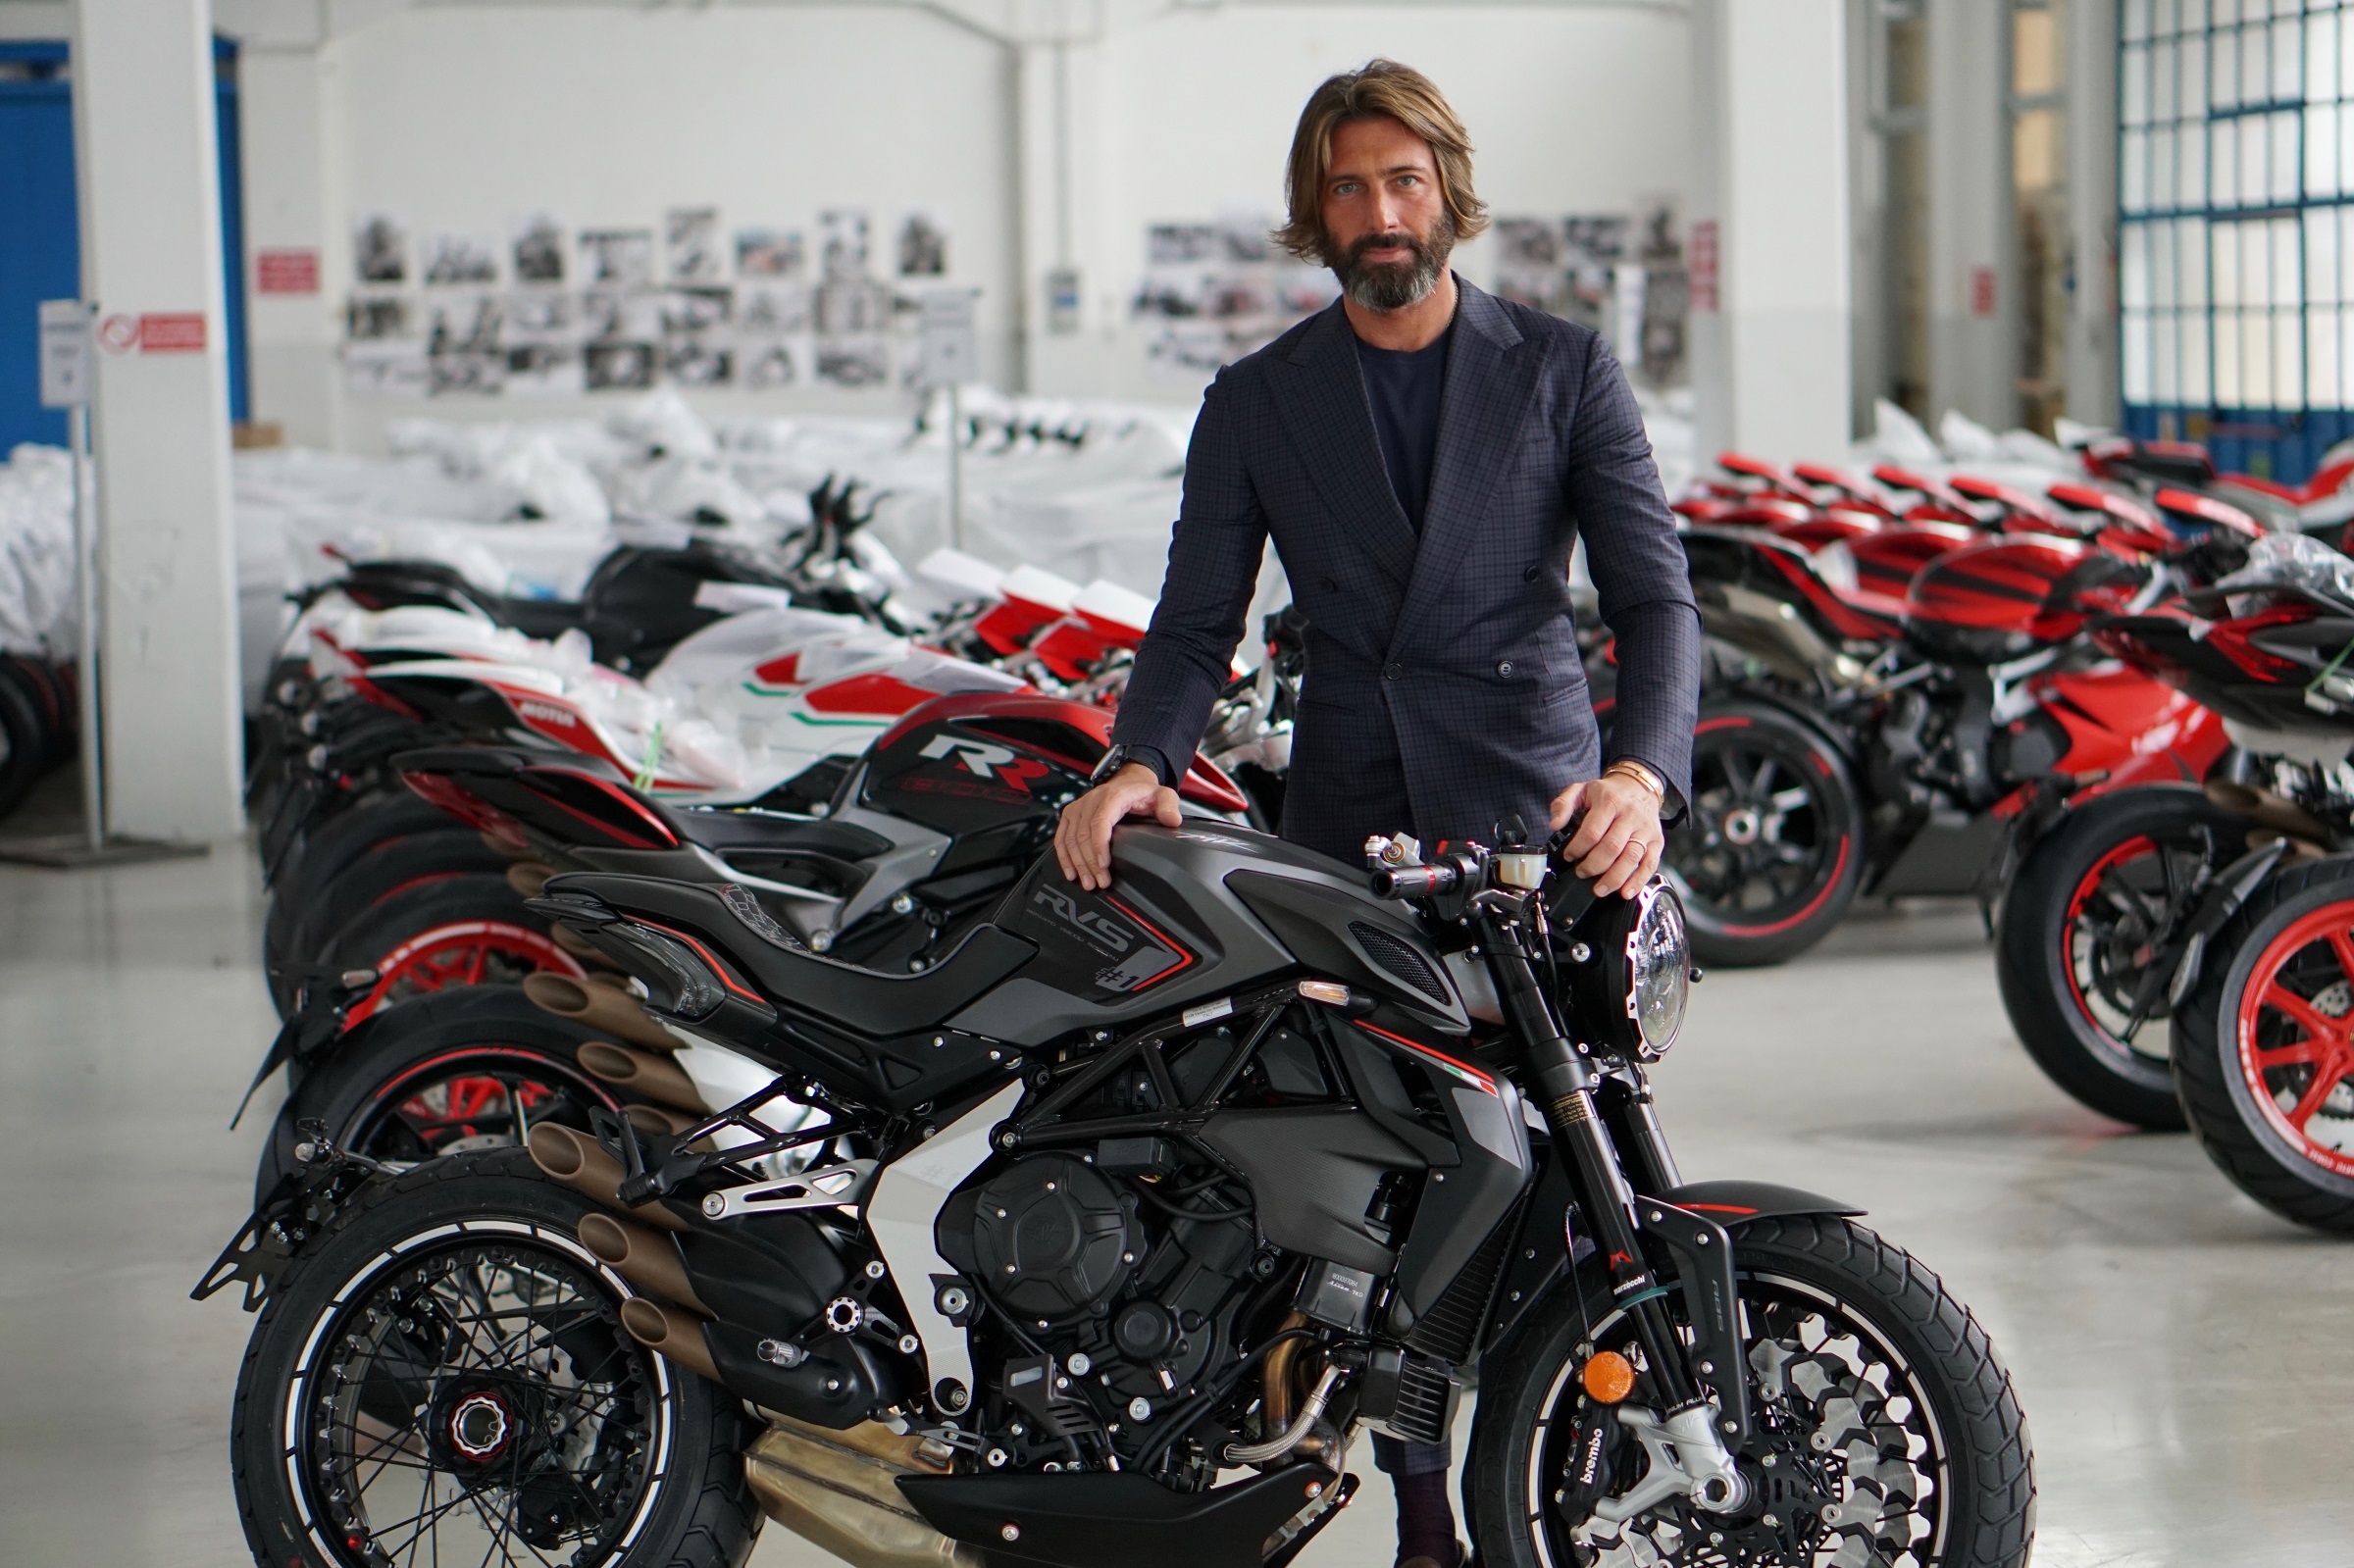 A view of the Castiglioni family, including Claudio and Giovanni, who both have bloodlines steeped in brands such as Husqvarna, Ducati and MV Agusta